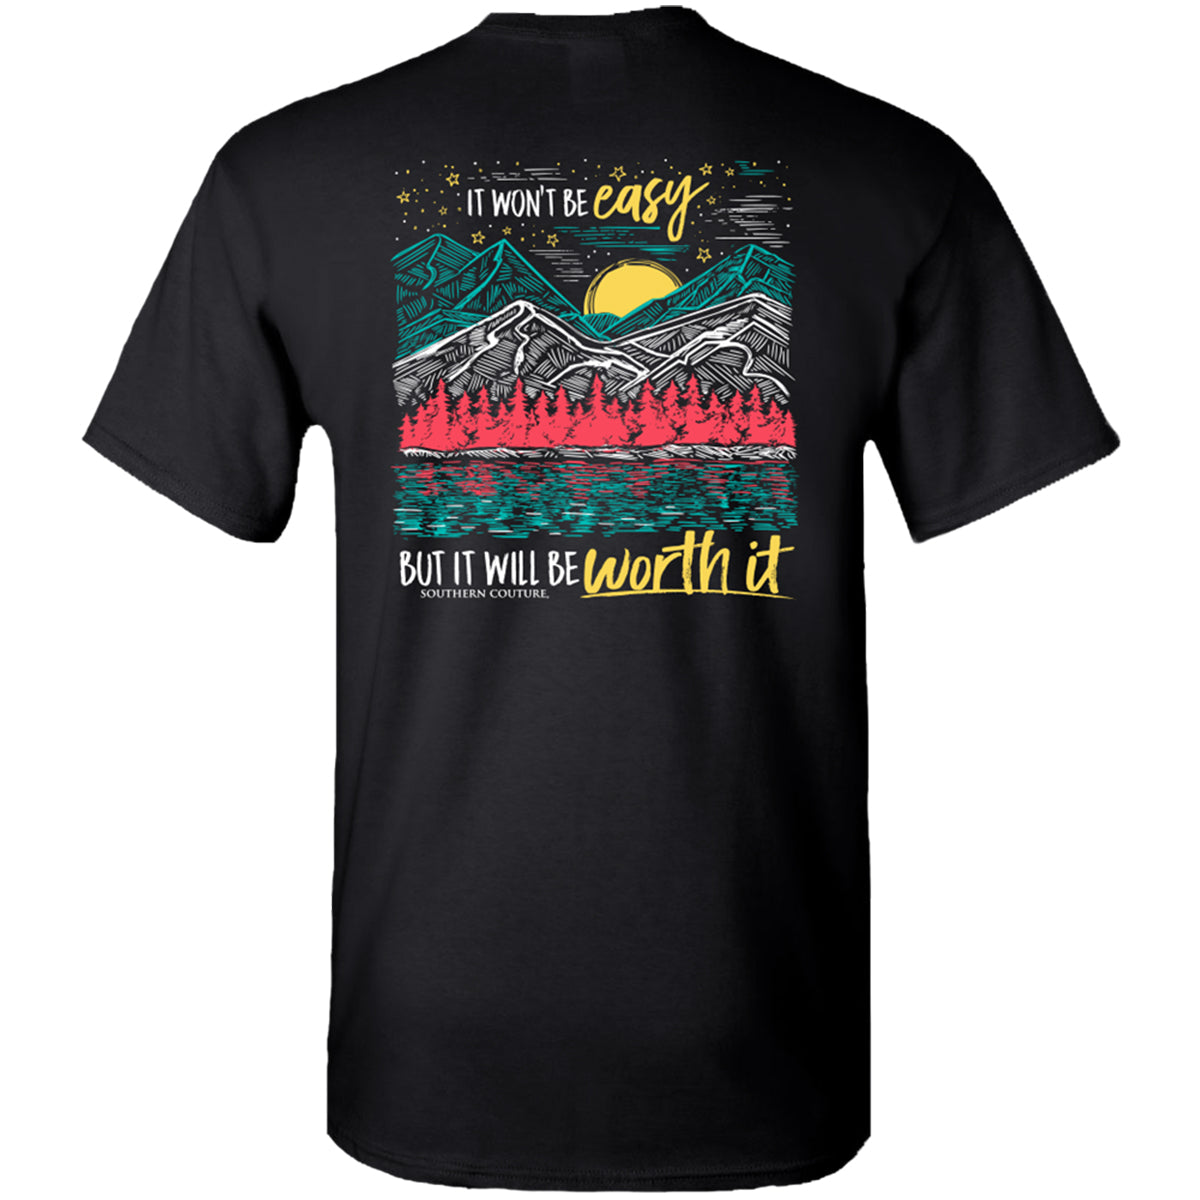 Southern Couture Classic It Won't Be Easy Mountains T-Shirt